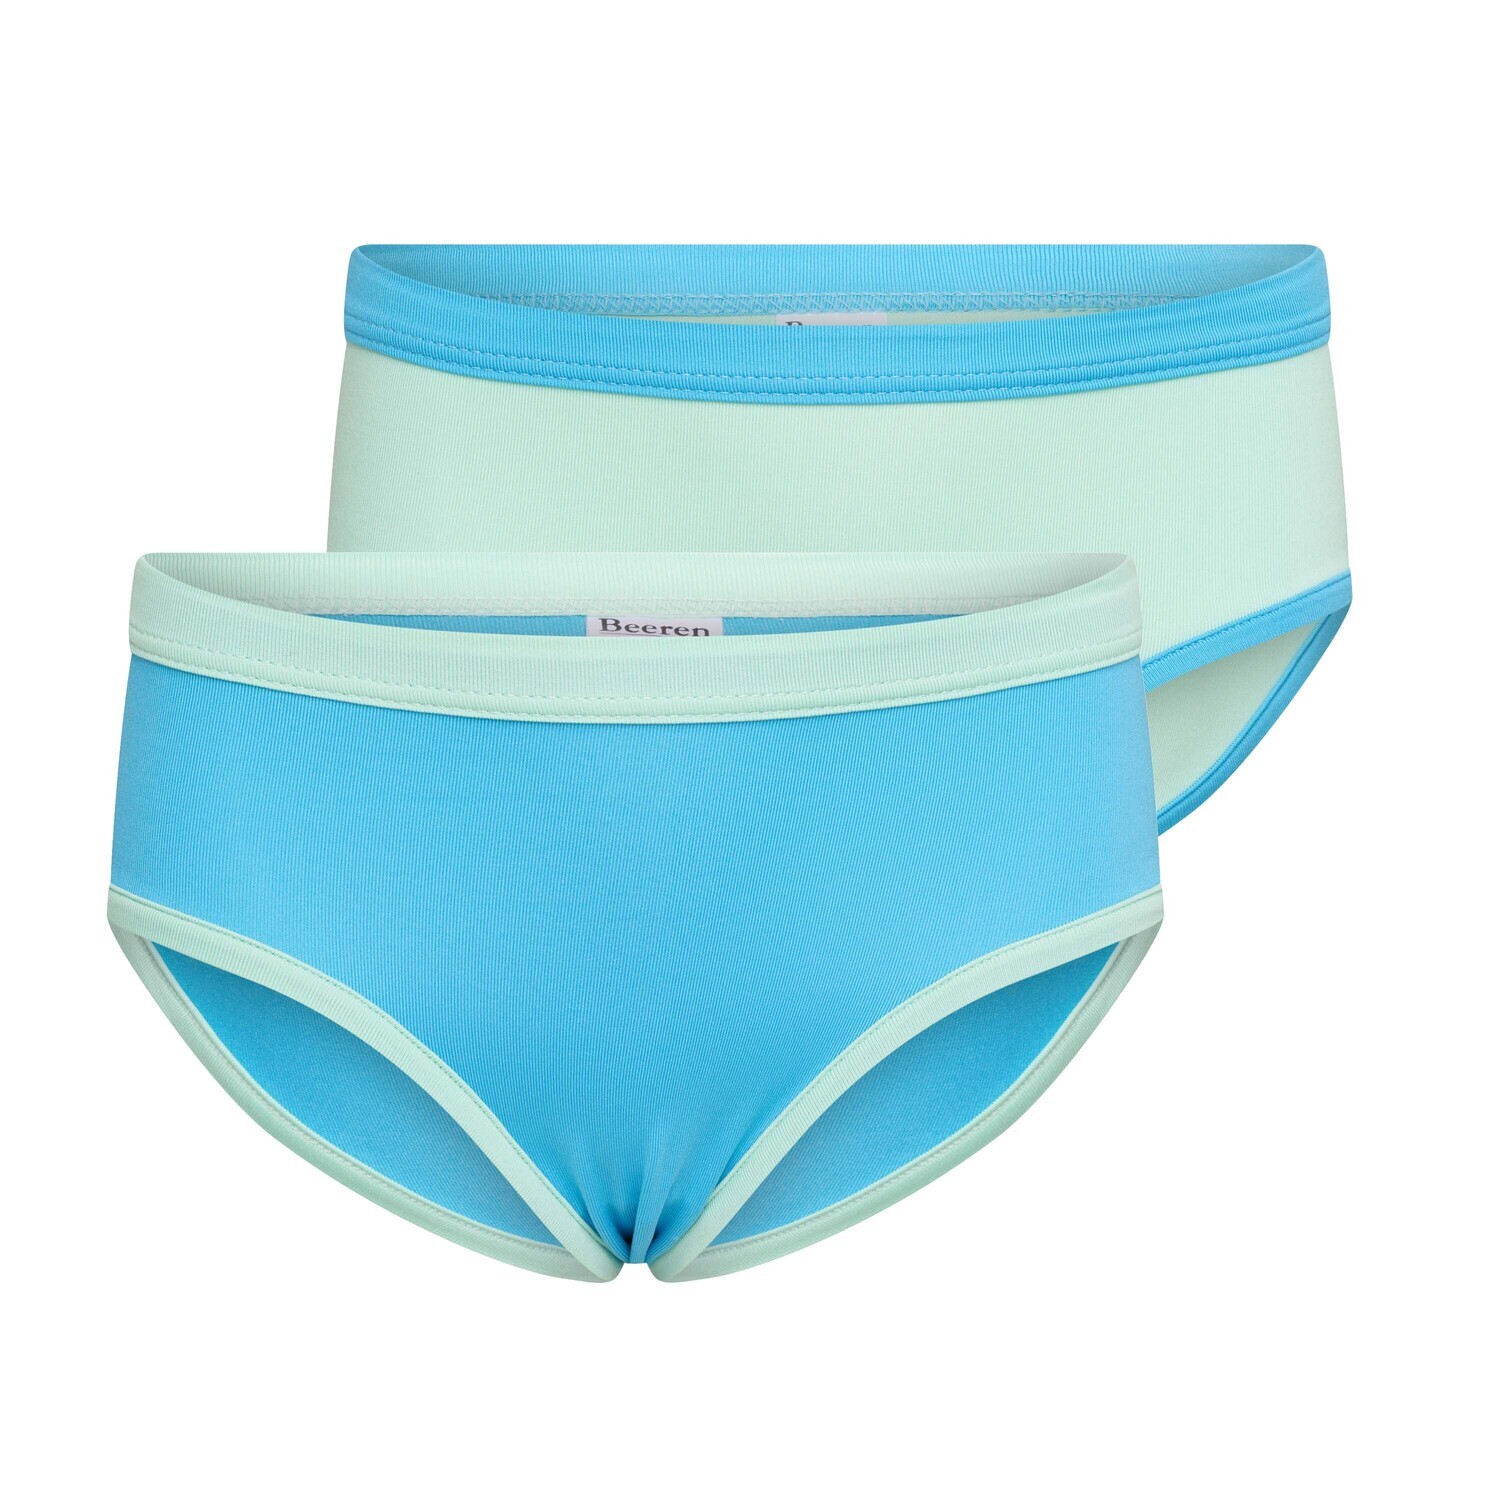 (03-233) Meisjes slip Mix and Match 2-Pack turquoise/mint 122/128